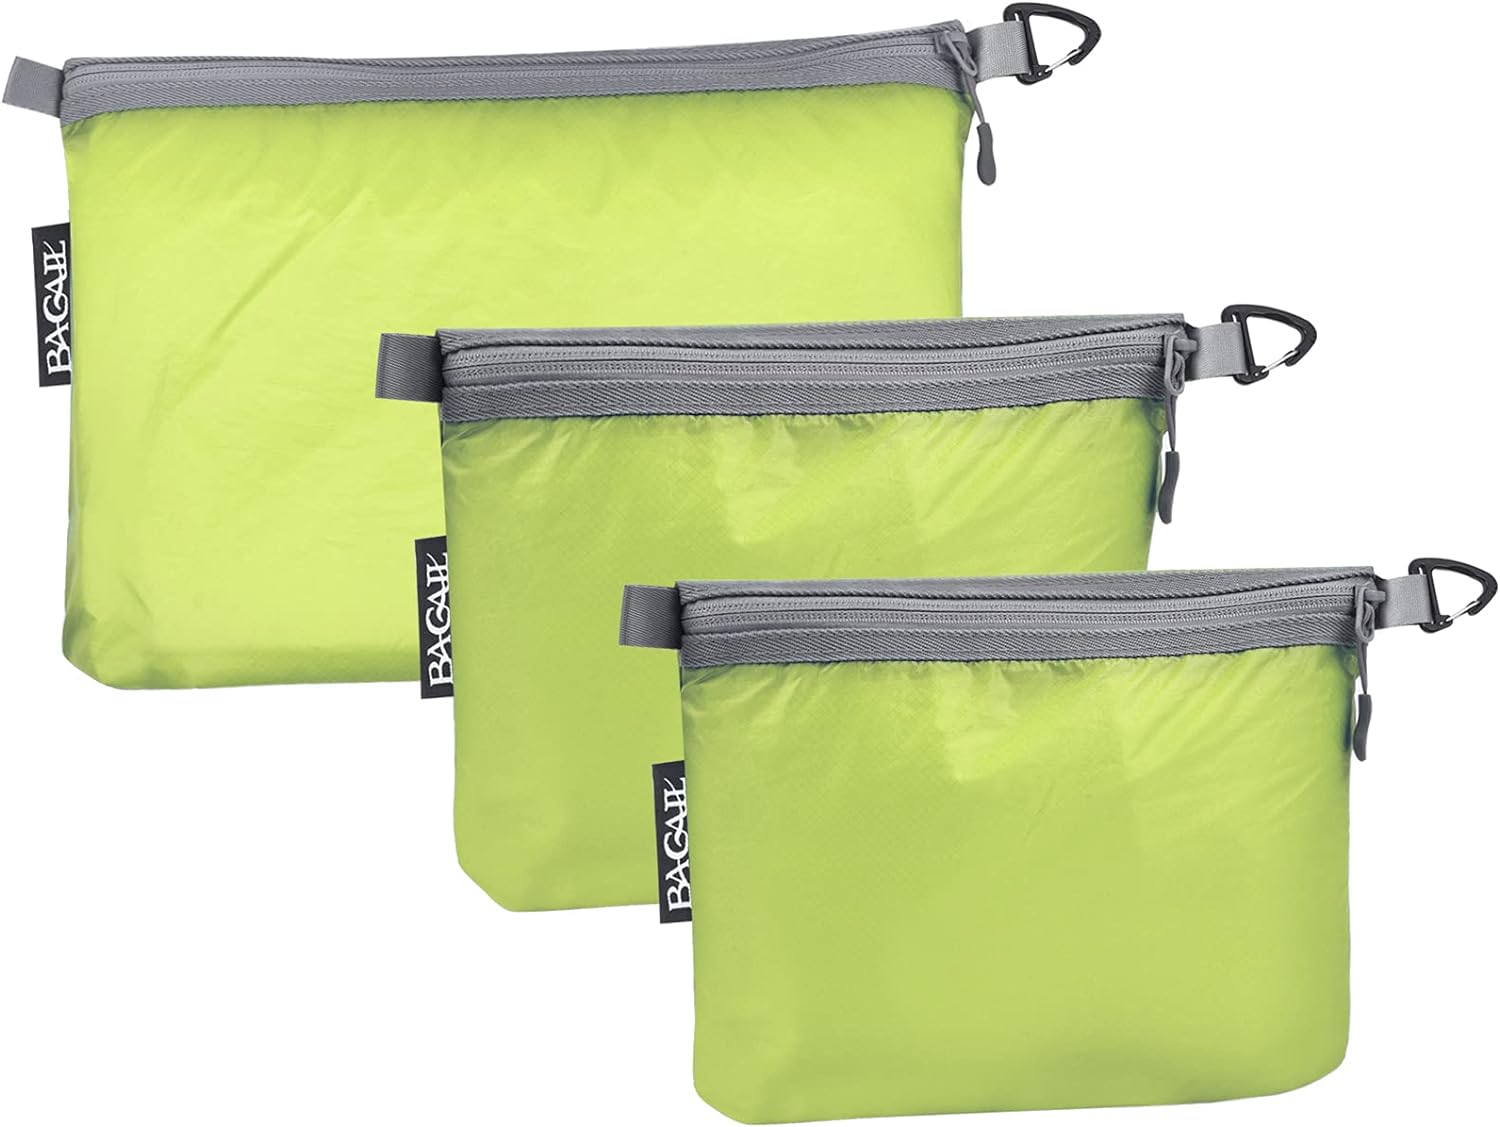 BAGAIL Ultralight Zipper Pouch Travel Packing Bags for Toiletries, Document, Electronics, Green